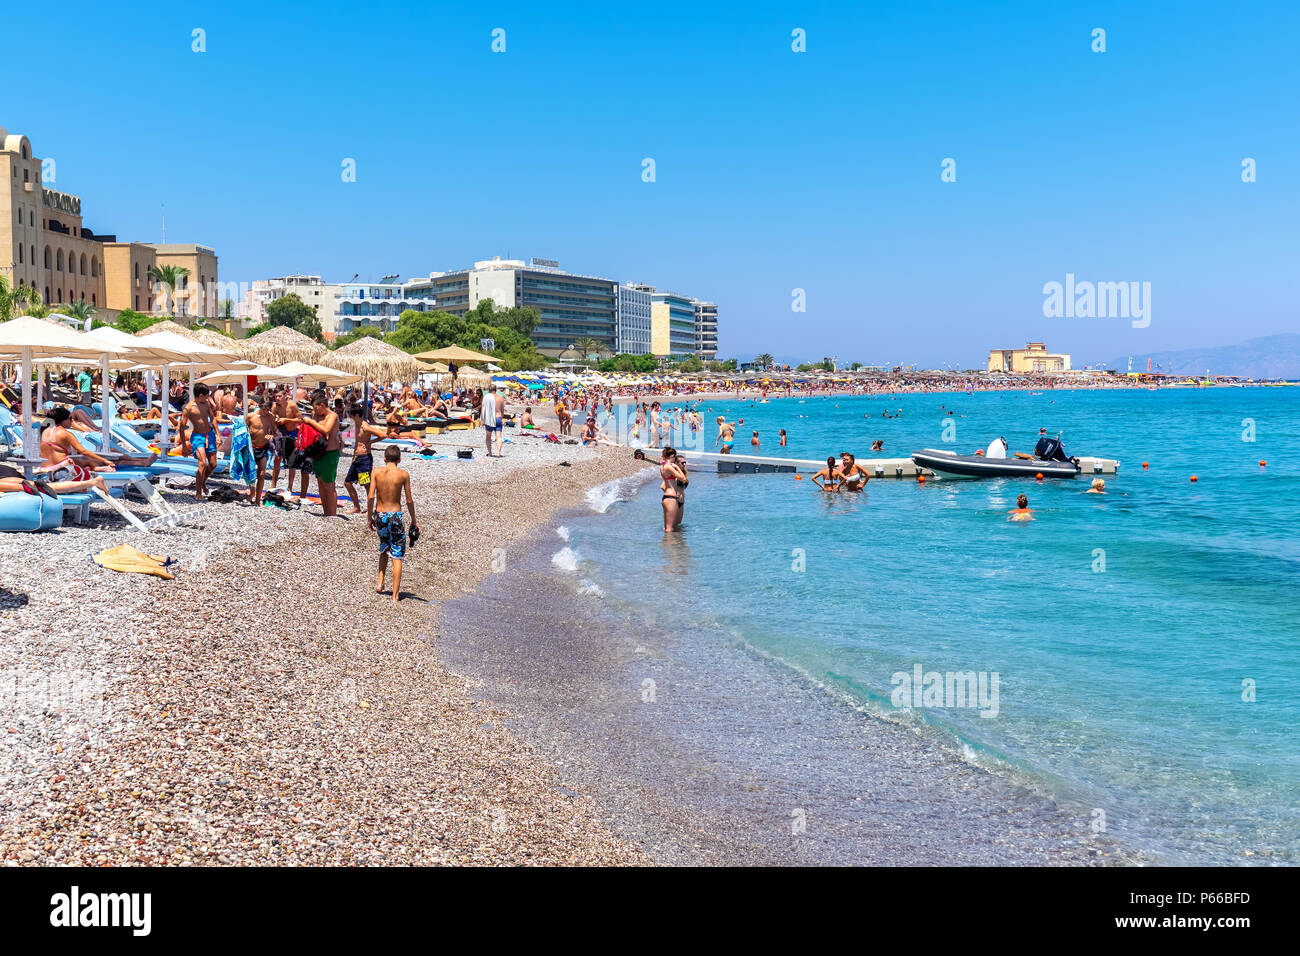 People relaxing and sunbathing at Elli Beach, the main beach of Rhodes Town. Greece Stock Photo